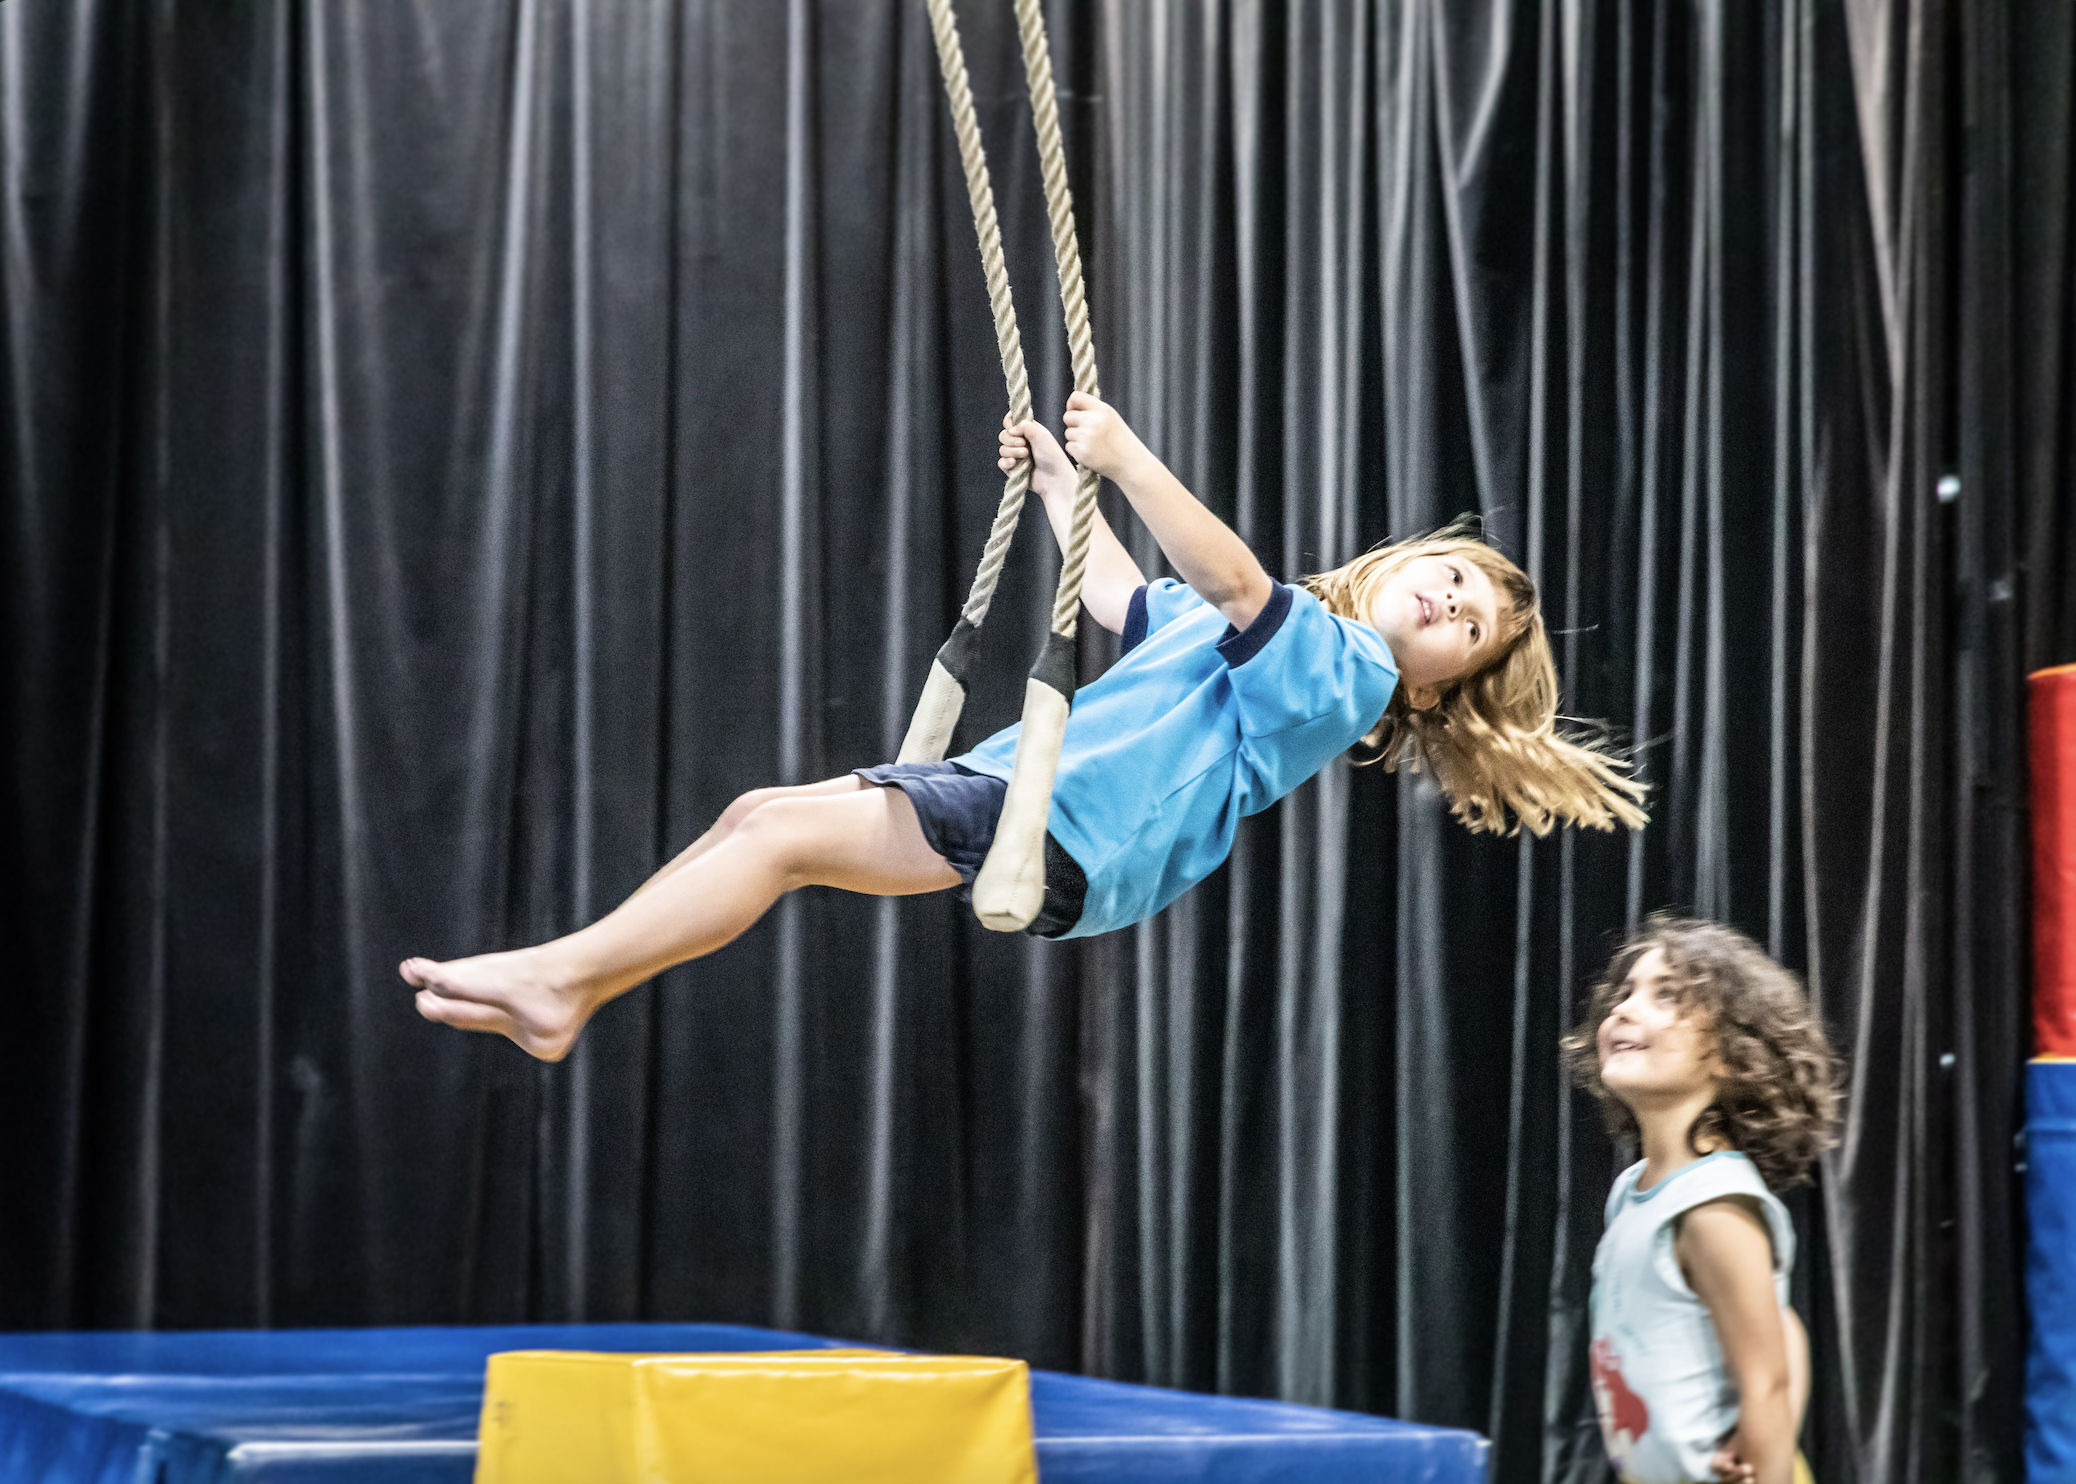 A child in Women's Circus training space swinging on a trapeze